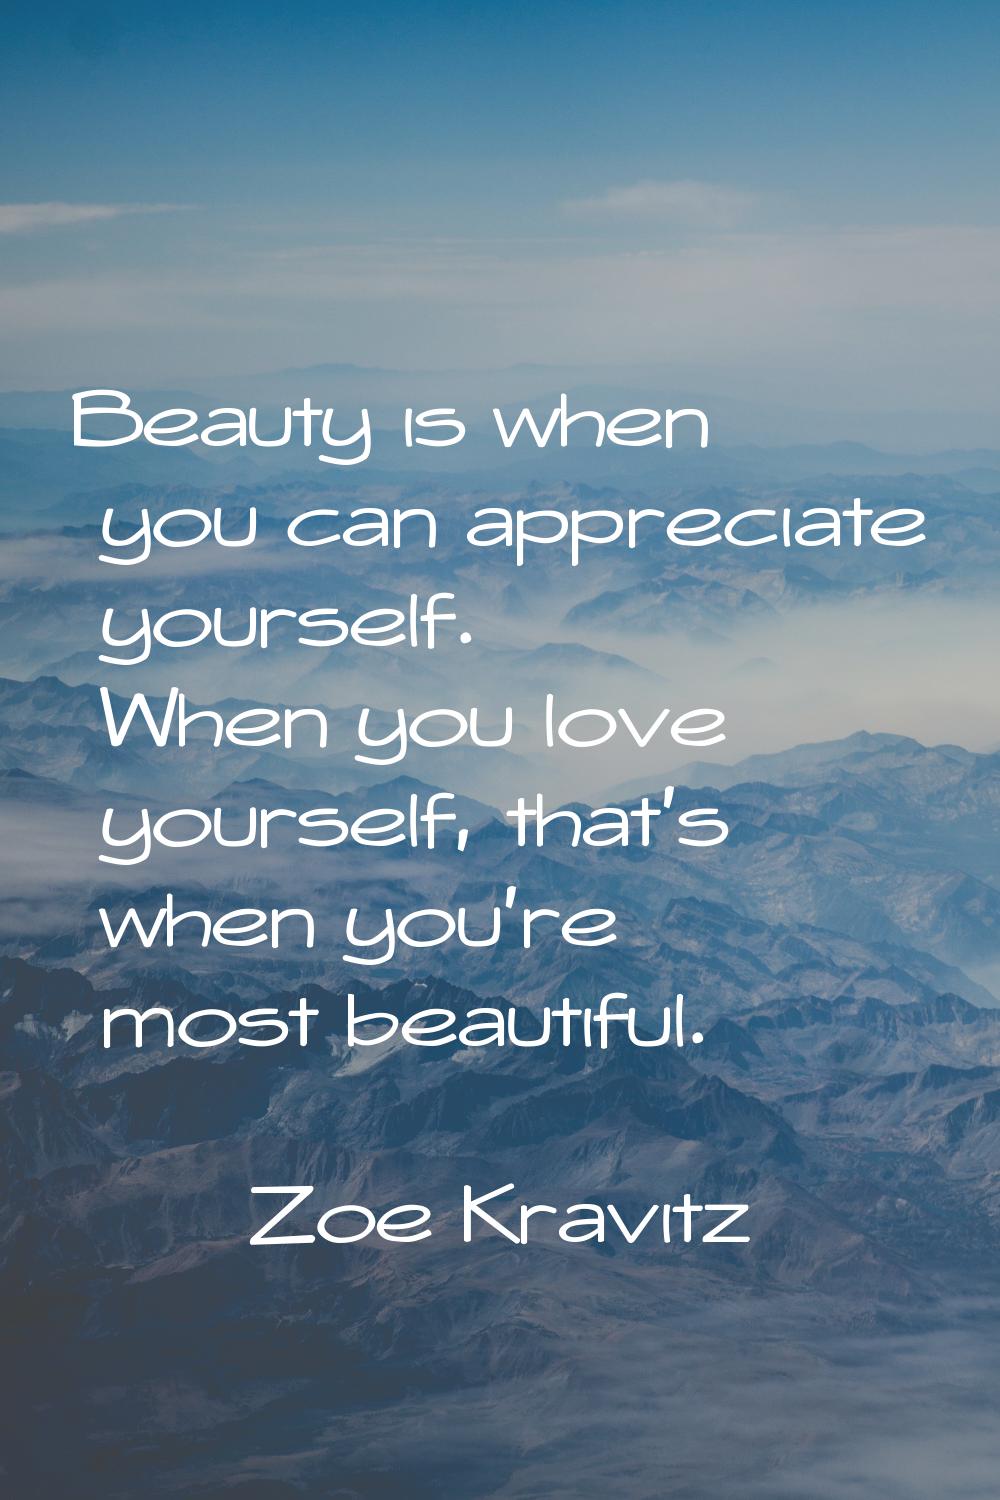 Beauty is when you can appreciate yourself. When you love yourself, that's when you're most beautif